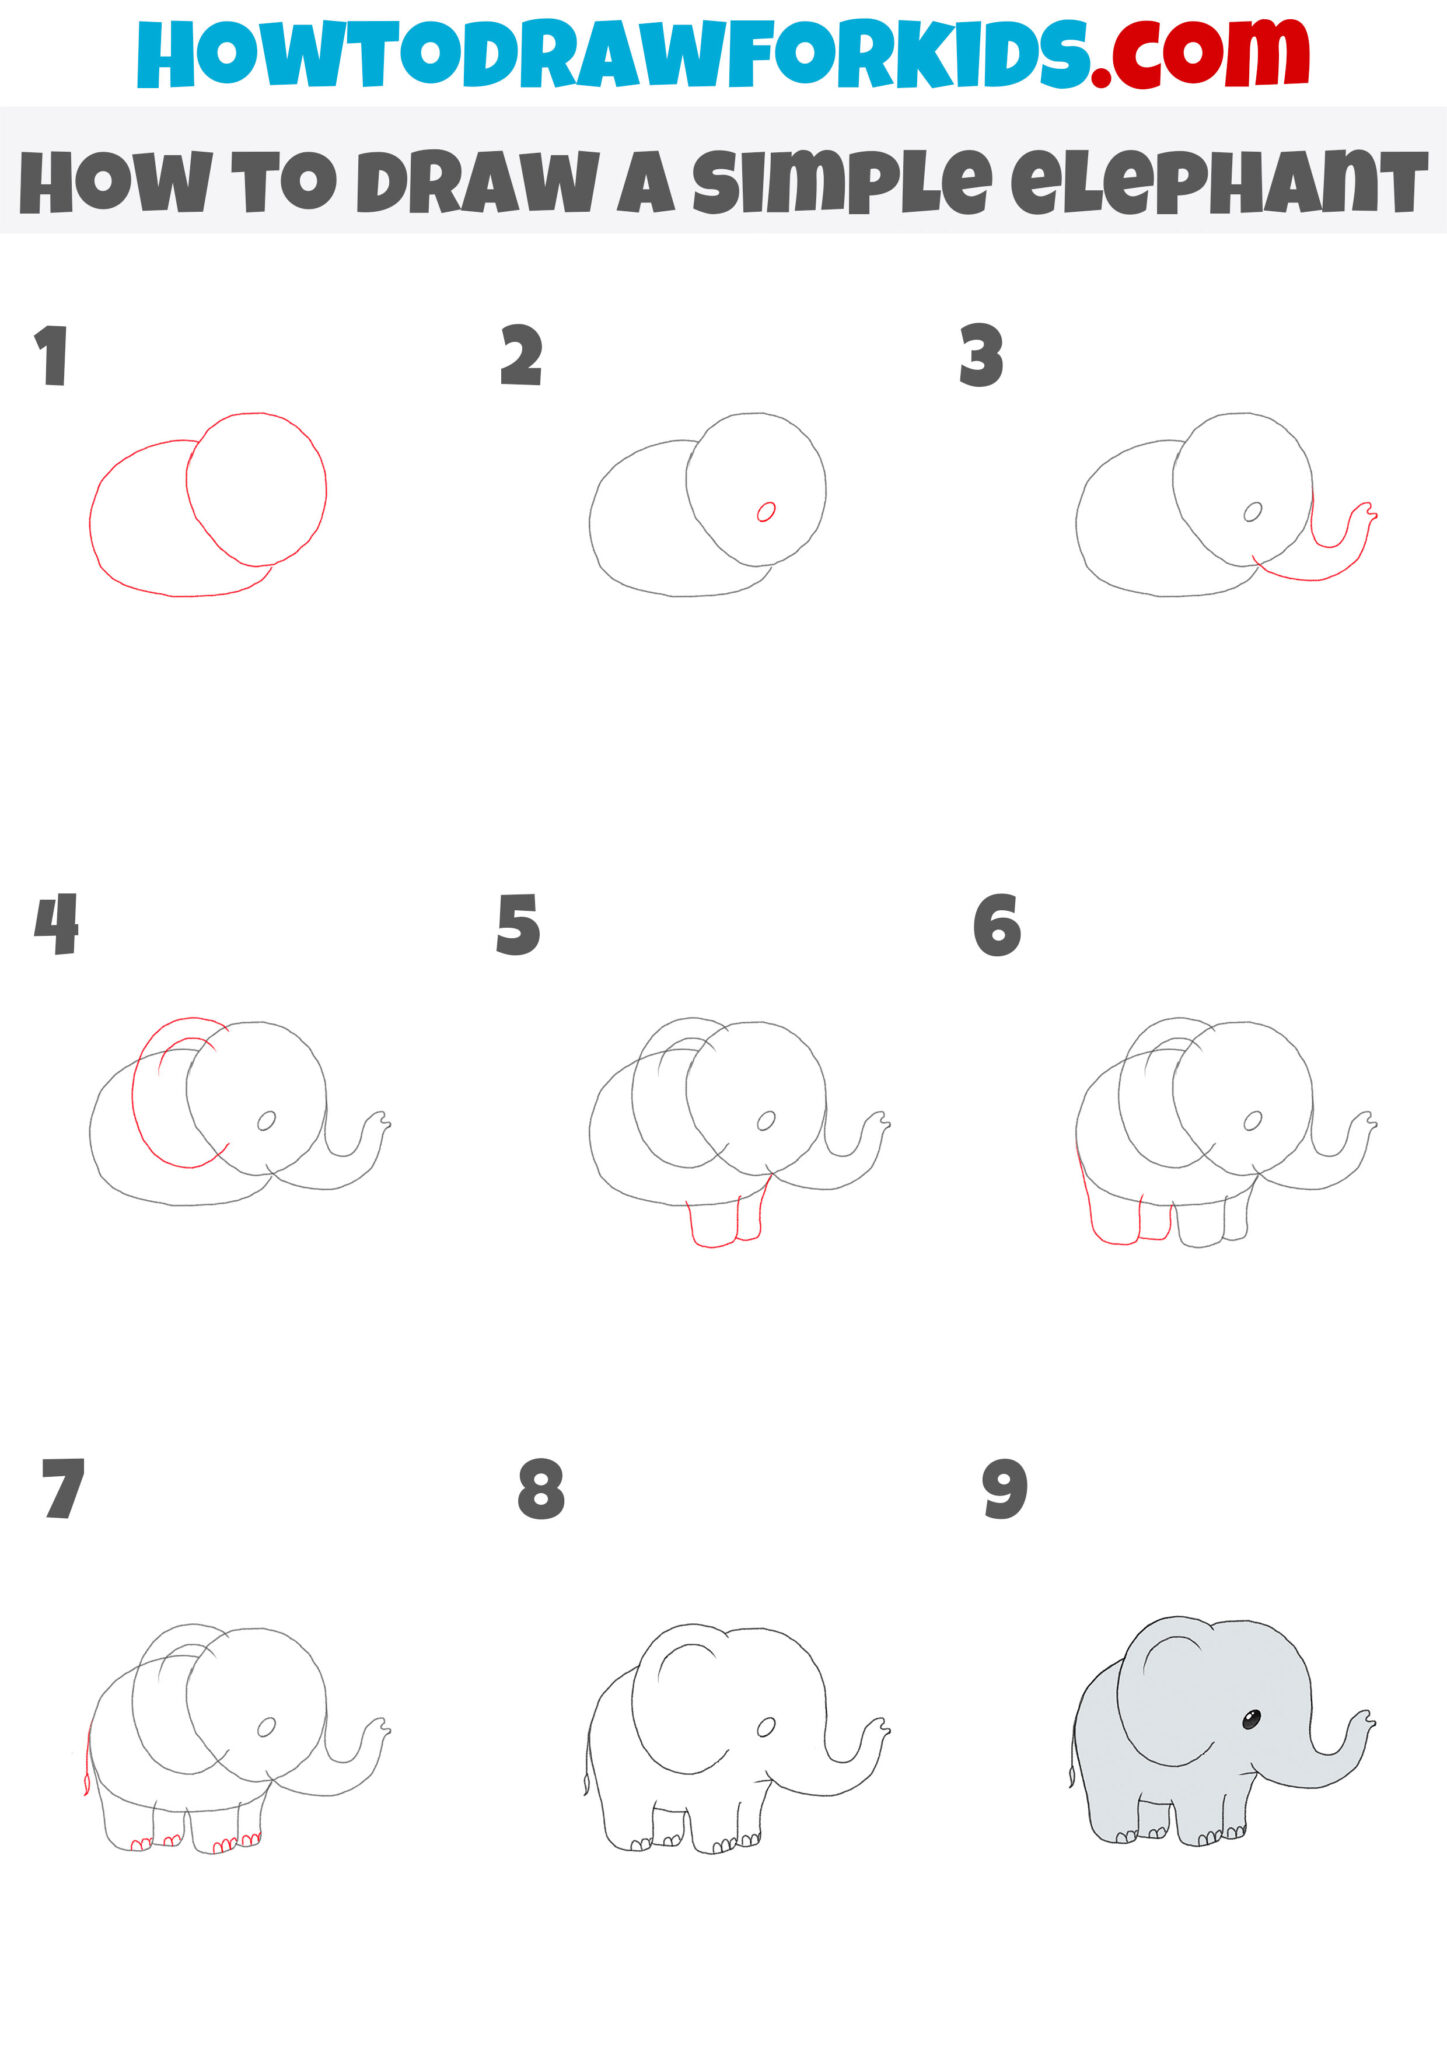 How to Draw a Simple Elephant - Easy Drawing Tutorial For Kids